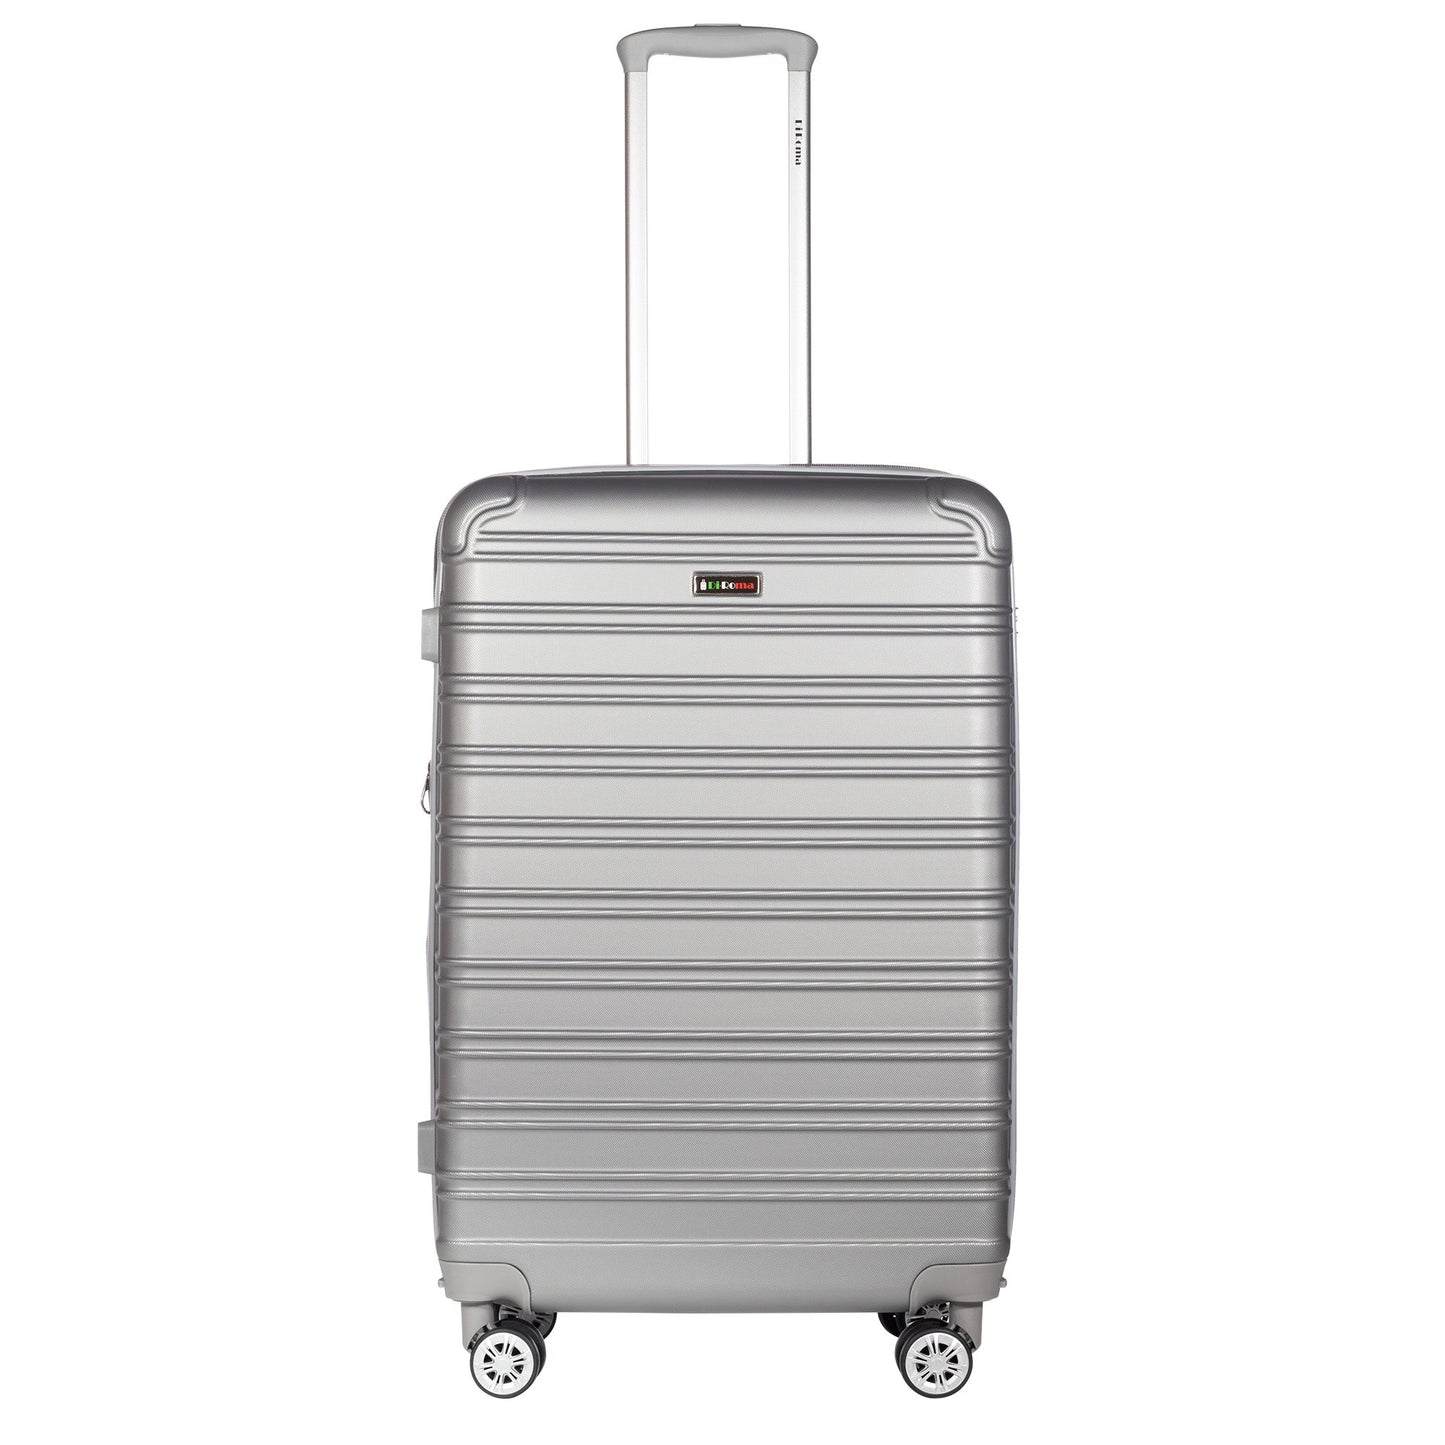 King Collection Silver luggage (20/26/28/30") Suitcase Lock Spinner Hard